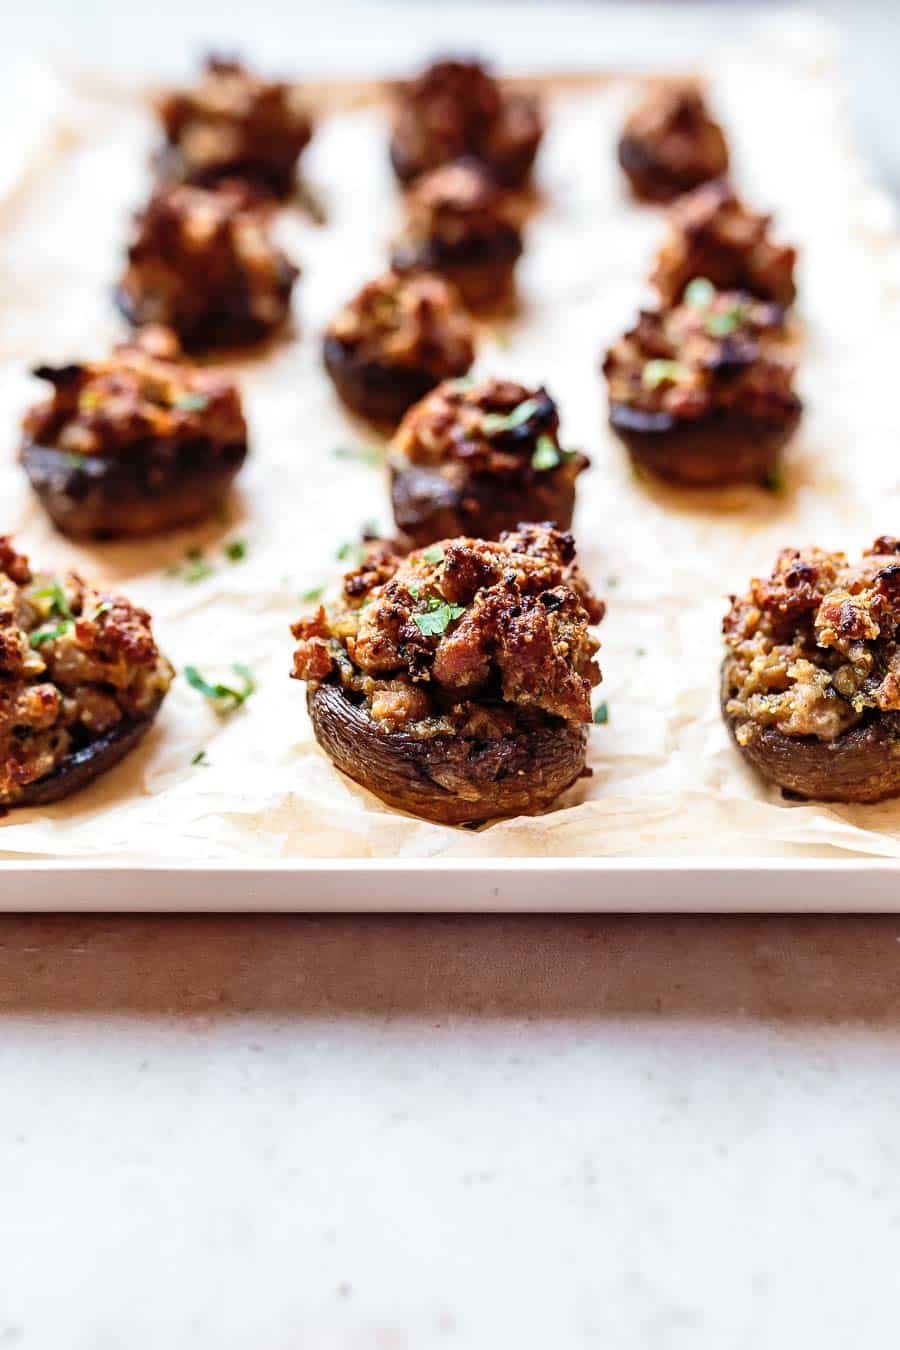 A slight angle, low perspective. A baking tray lined with baking paper and topped with lots of baked sausage stuffed mushrooms. The mushrooms closest to the camera are in focus and moving back, they decrease in focus.